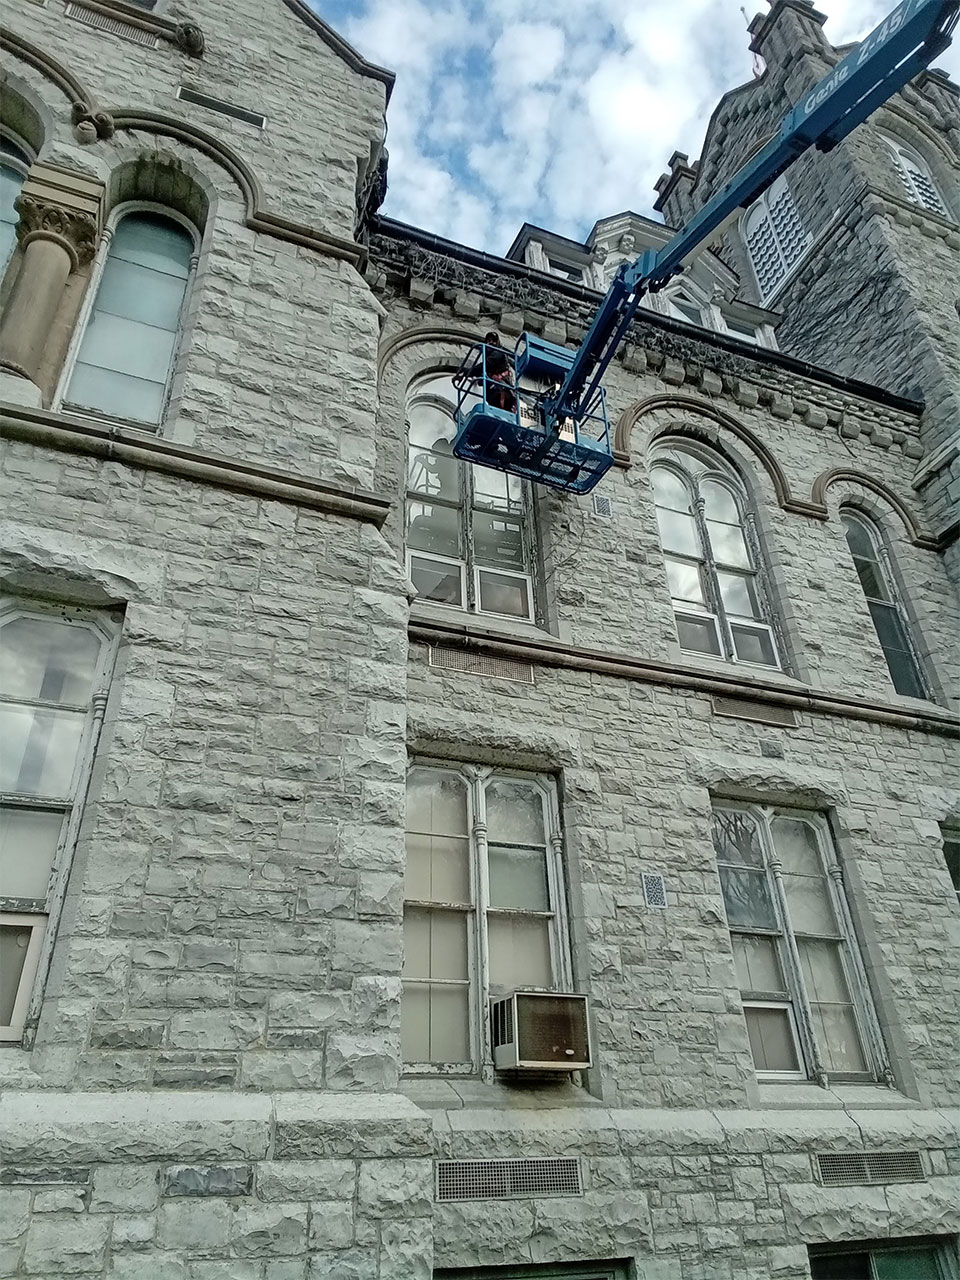 installer using a lift truck to put in a custom cut window pane for a heritage building